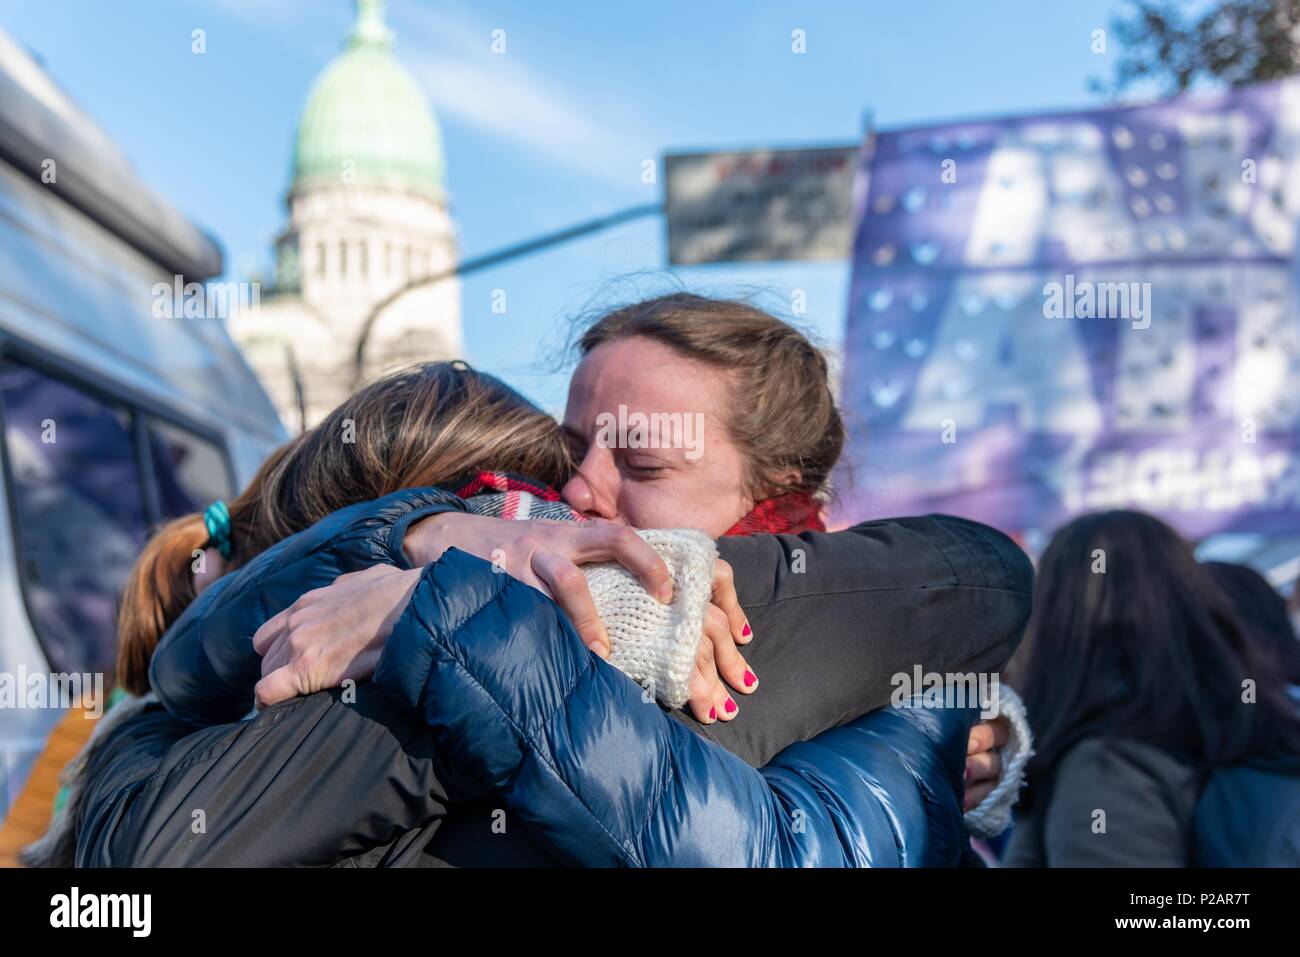 Buenos Aires, Argentina. 14th June, 2018. Two women hug and celebrate as Argentine lawmakers approved a bill to legalize elective abortions following a heated debate over a proposal that would make the country the first major Latin American nation to ease strict antiabortion laws. Chamber of Deputies narrowly approves legislation allowing abortions during the first 14 weeks of pregnancy. Credit: Maximiliano Javier Ramos/ZUMA Wire/Alamy Live News Stock Photo